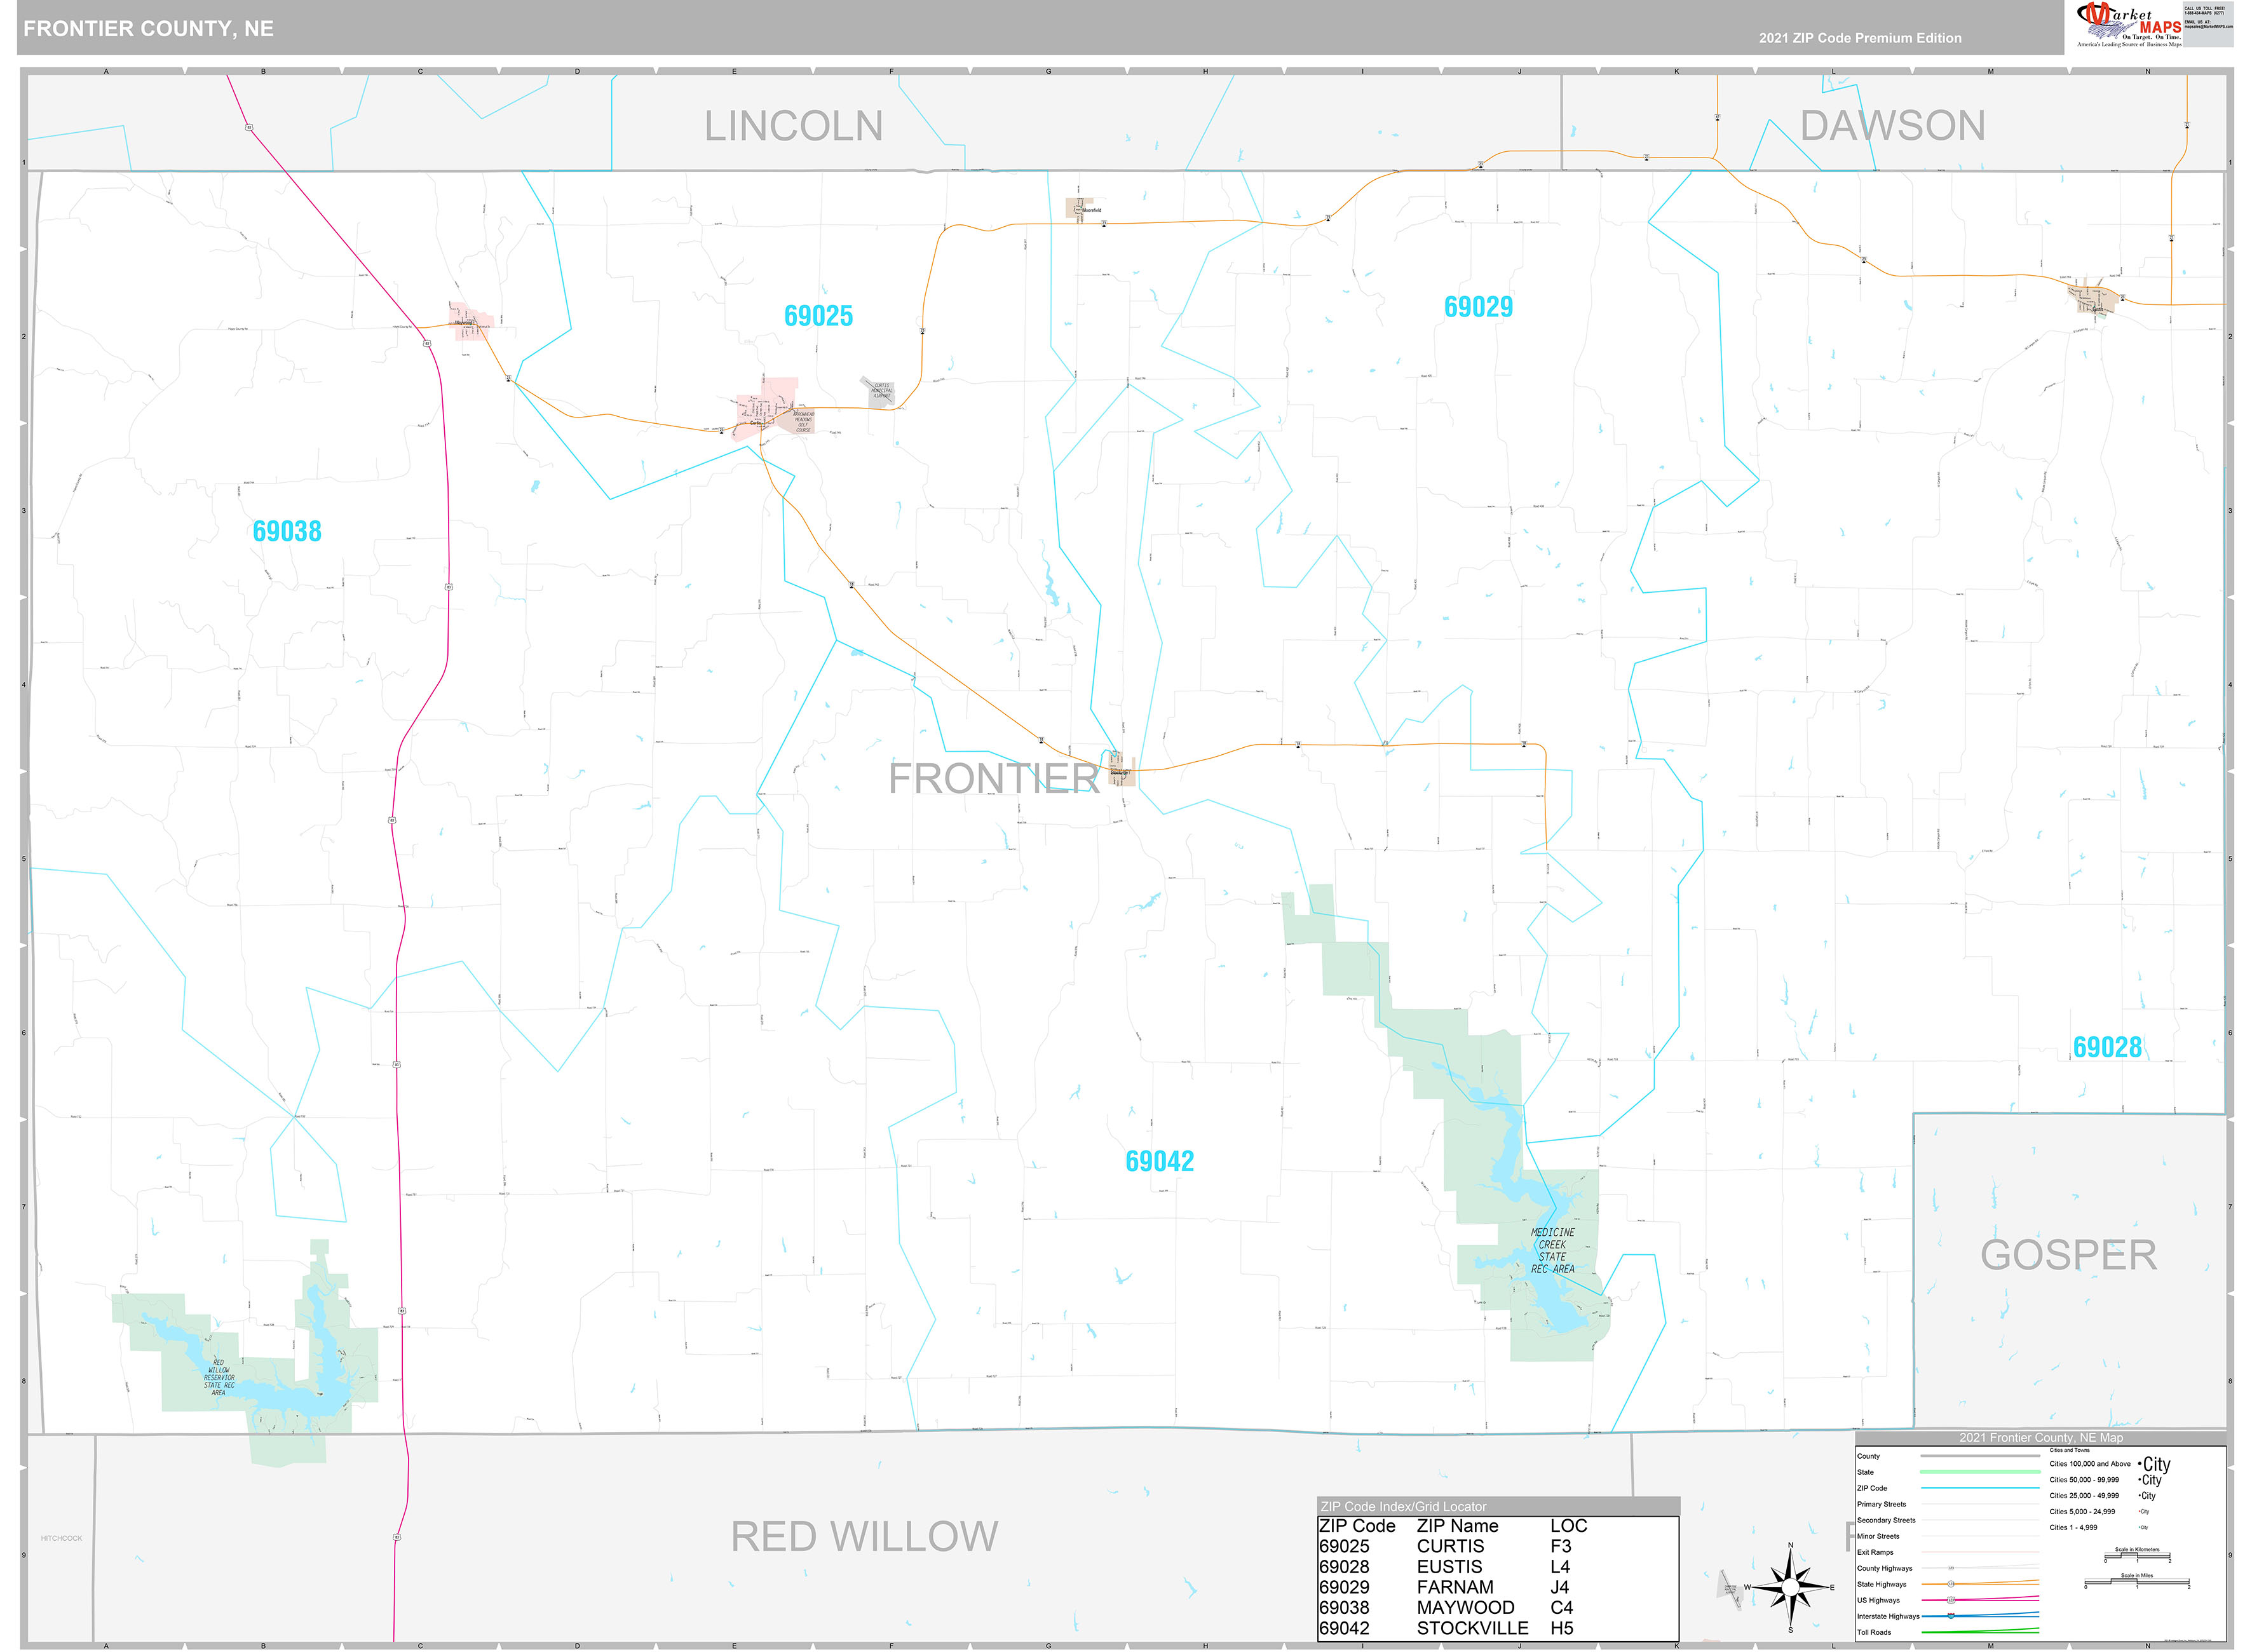 Frontier County, NE Wall Map Premium Style by MarketMAPS